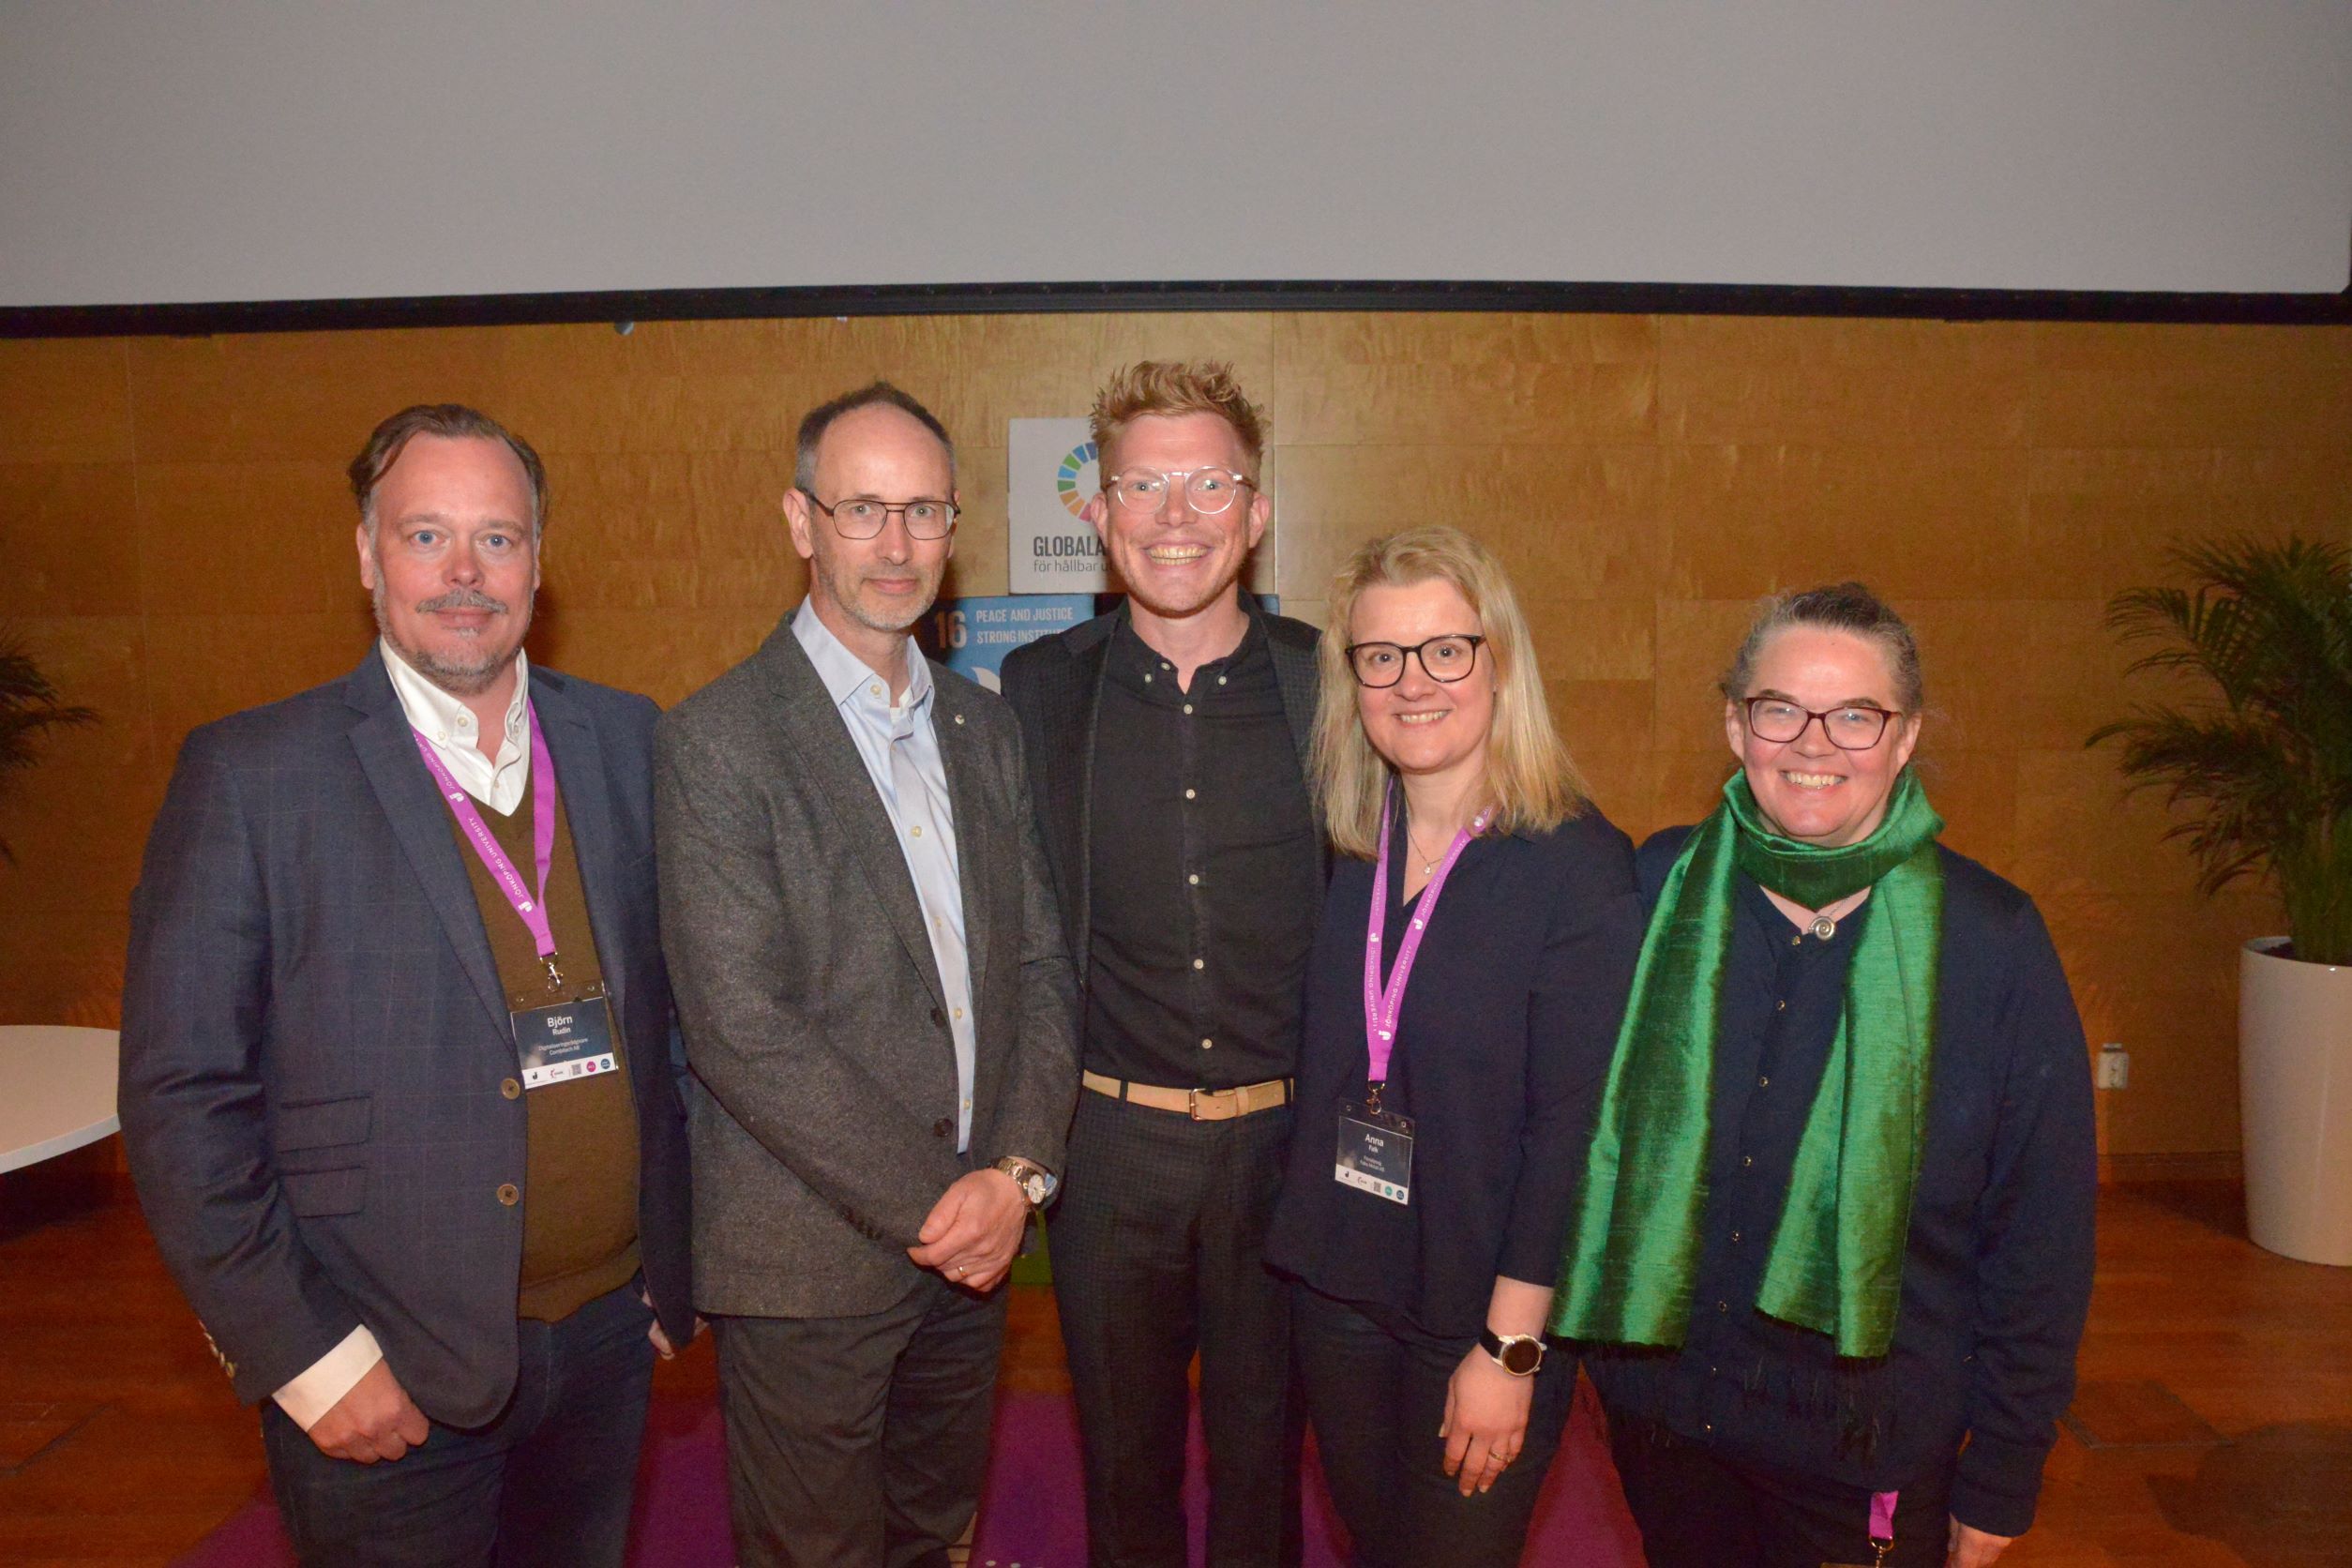 Jonas Gallneby (in the middle) and the key note speakers during the SPARK conference.